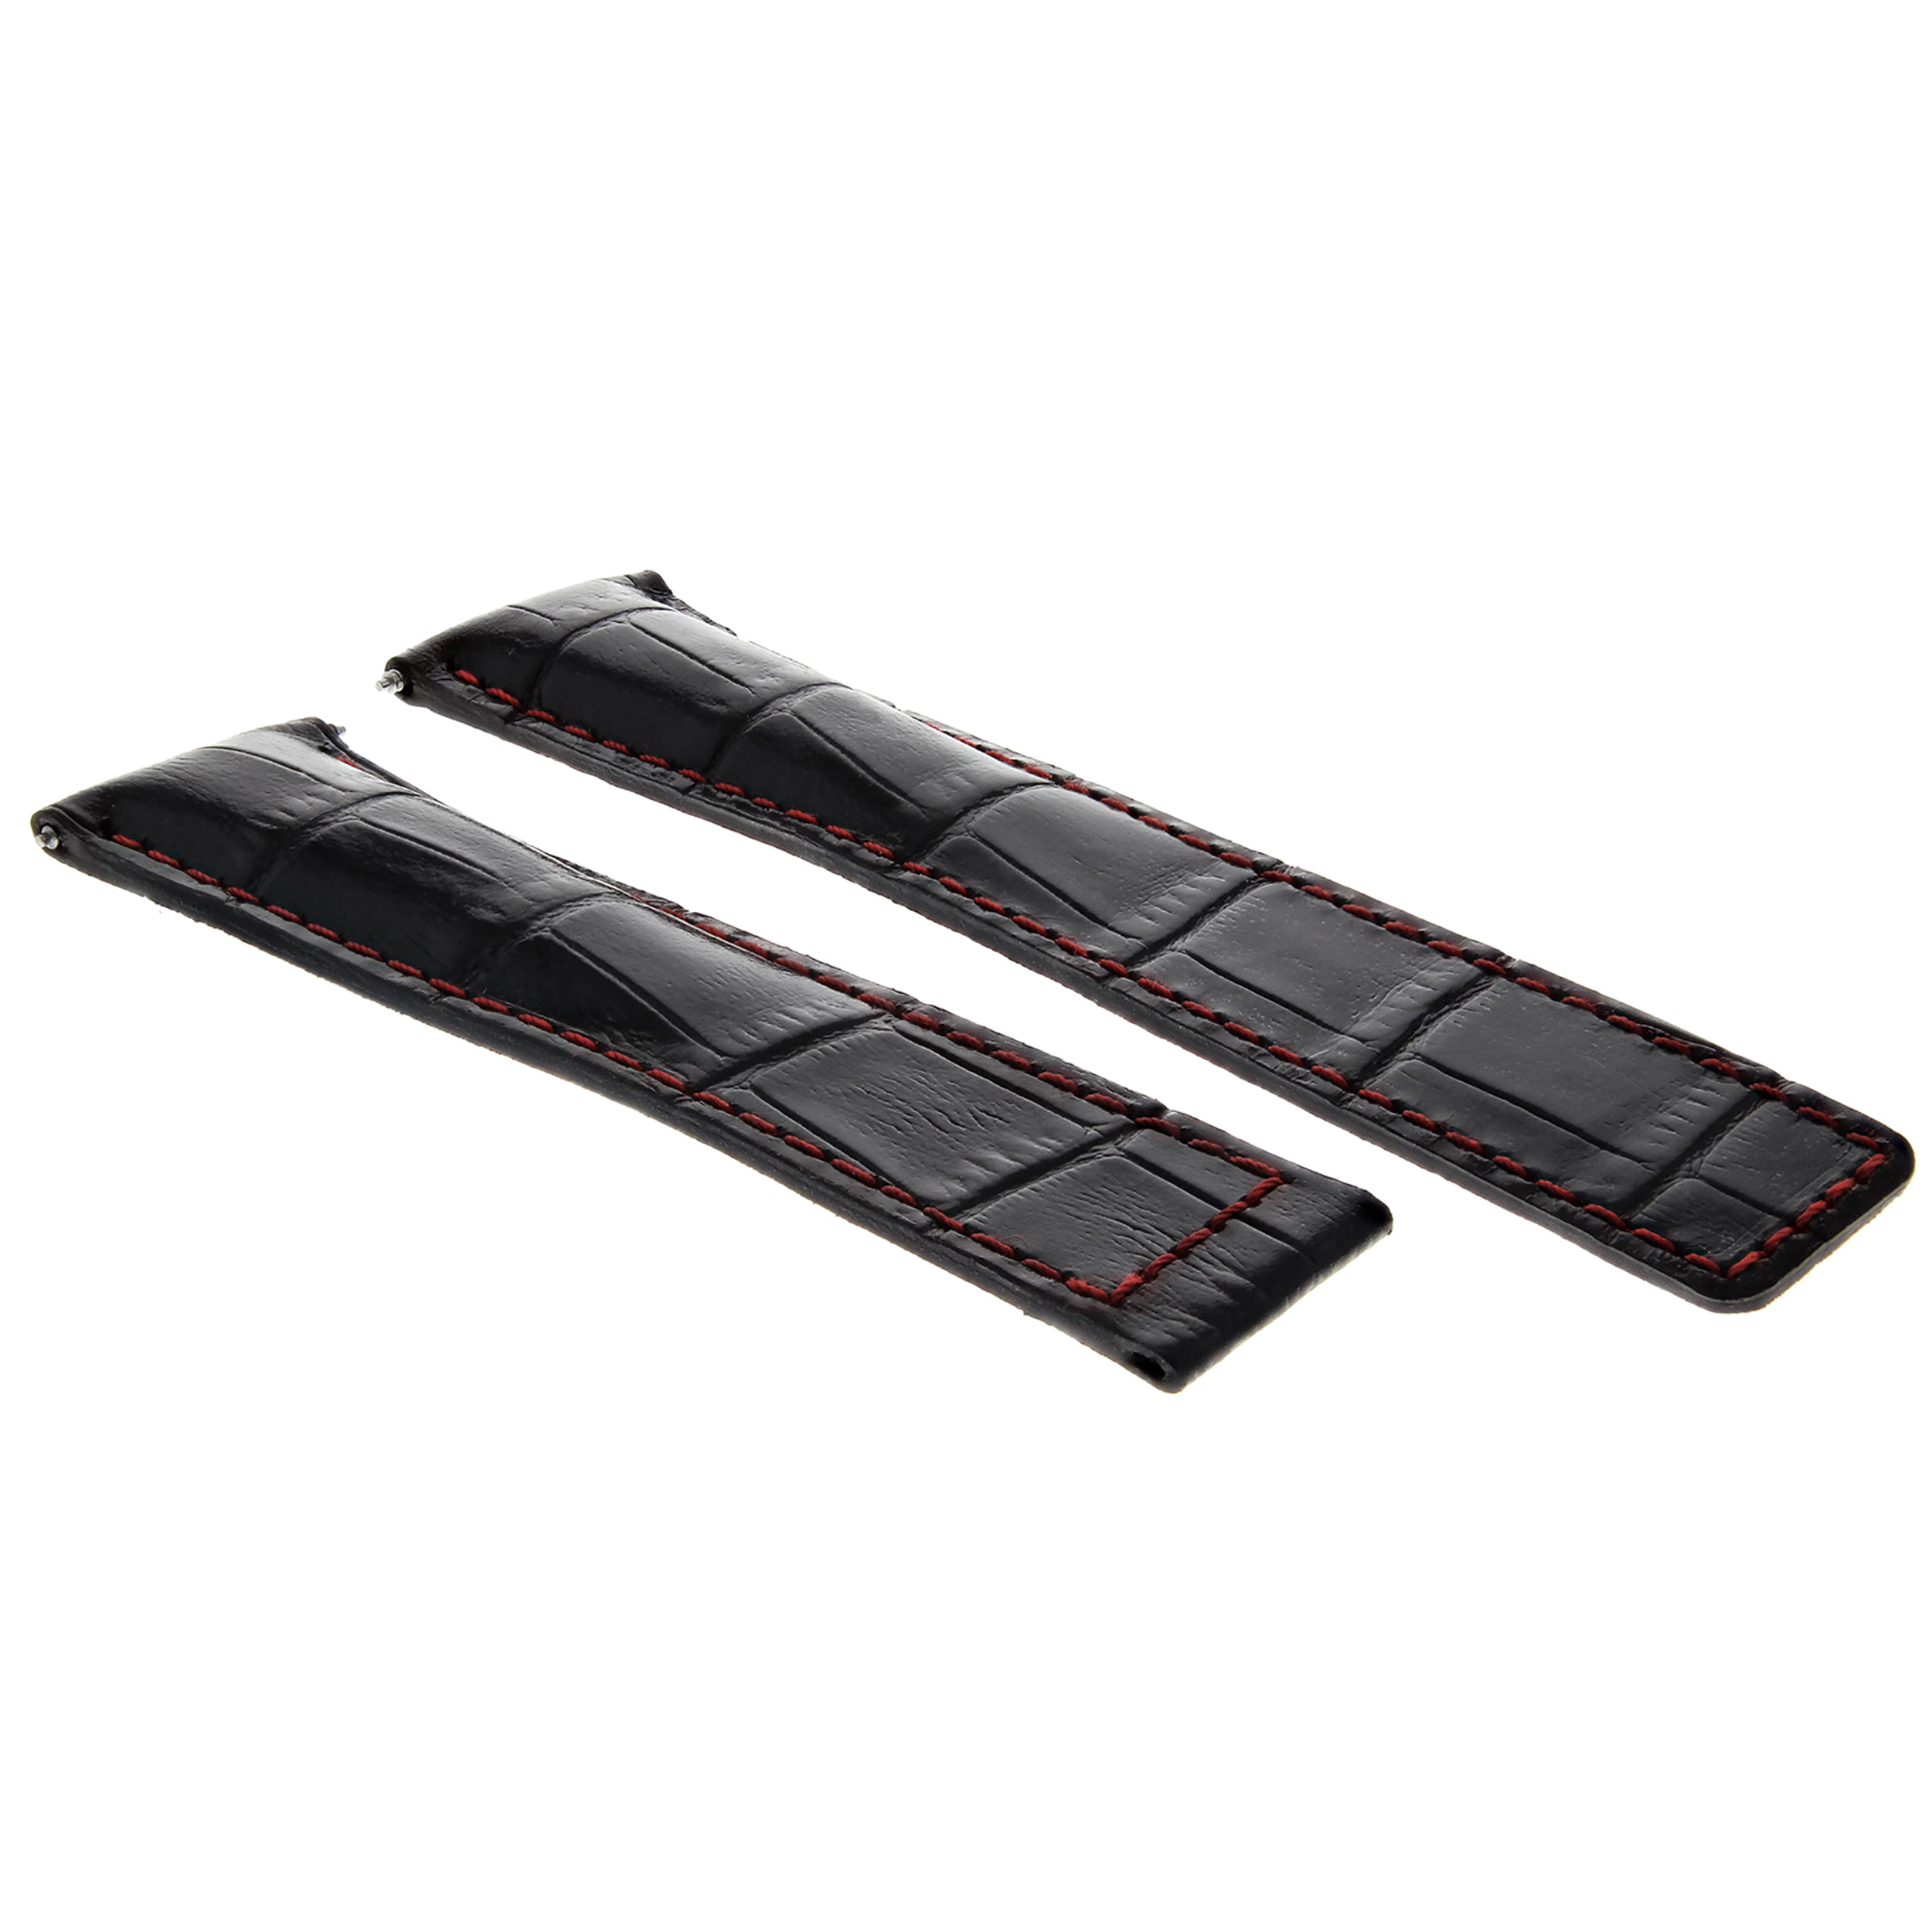 Details about   20MM LEATHER BAND STRAP FOR TAG HEUER PROFESSIONAL 2002 WK-1 CLASP BLACK RED 